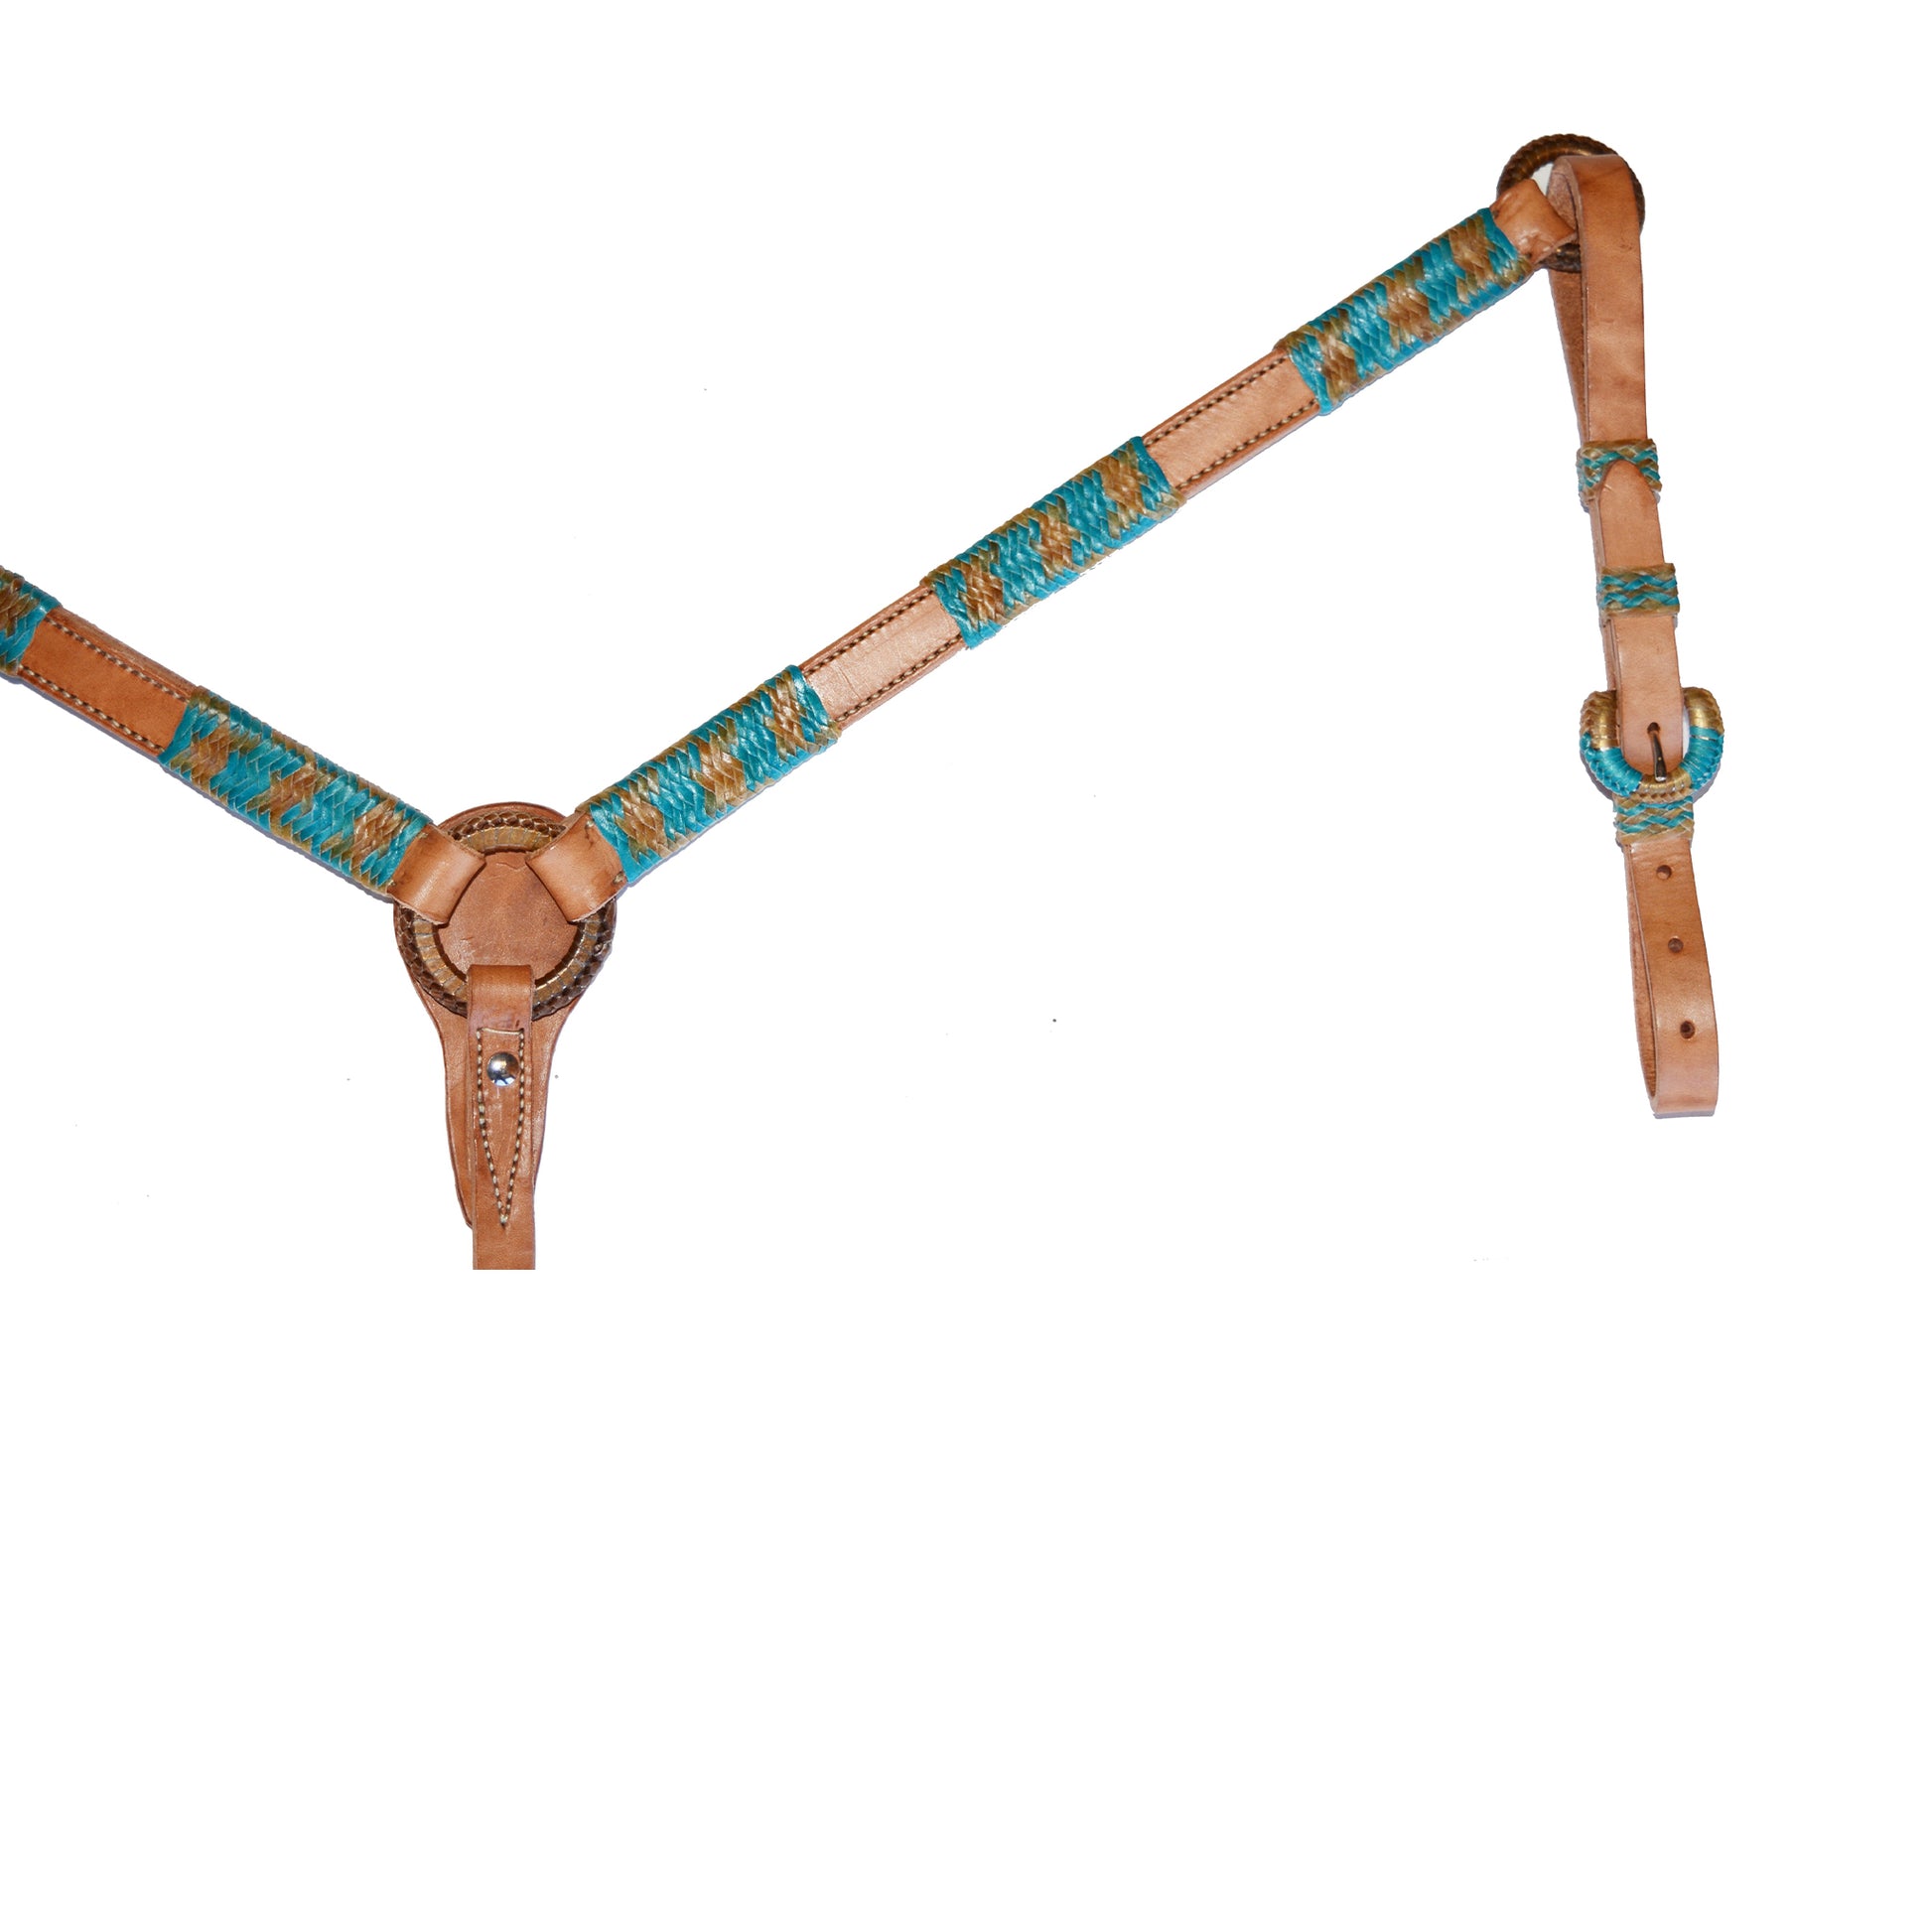 1" Breast collar harness leather natural and teal rawhide braiding with Spanish lace hardware.